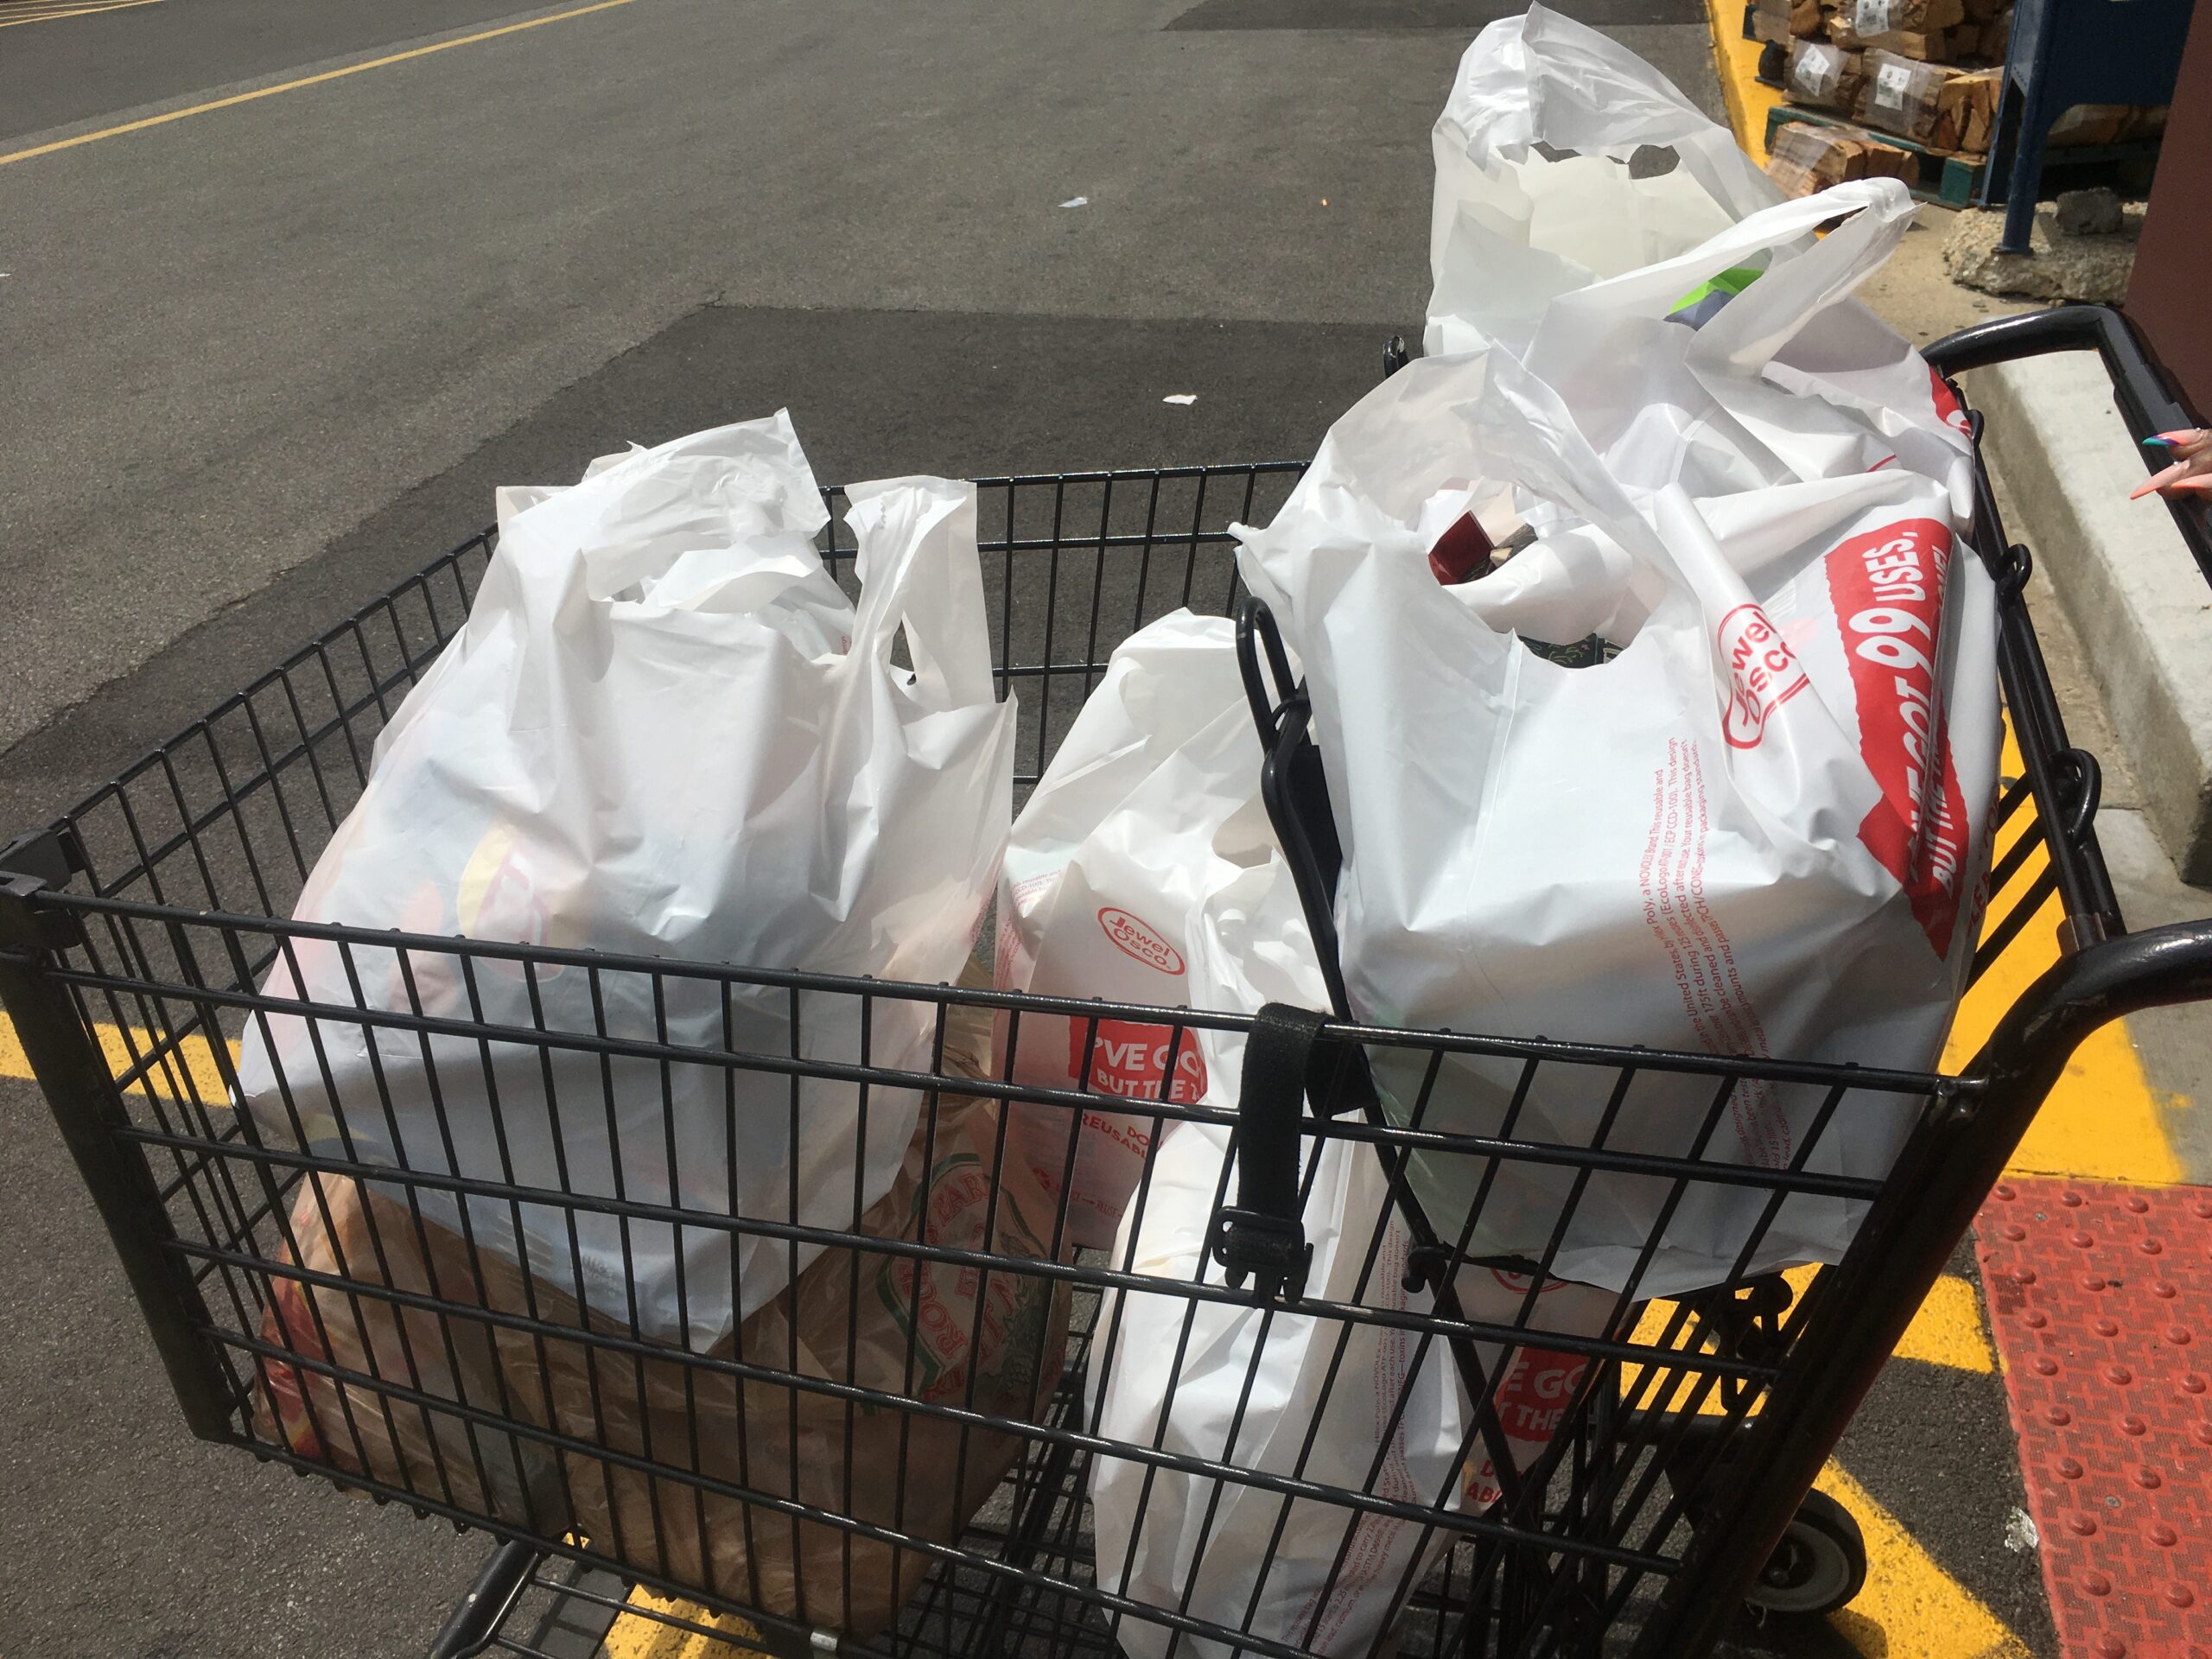 Plastic bags could be out by at stores citywide by Aug. 1